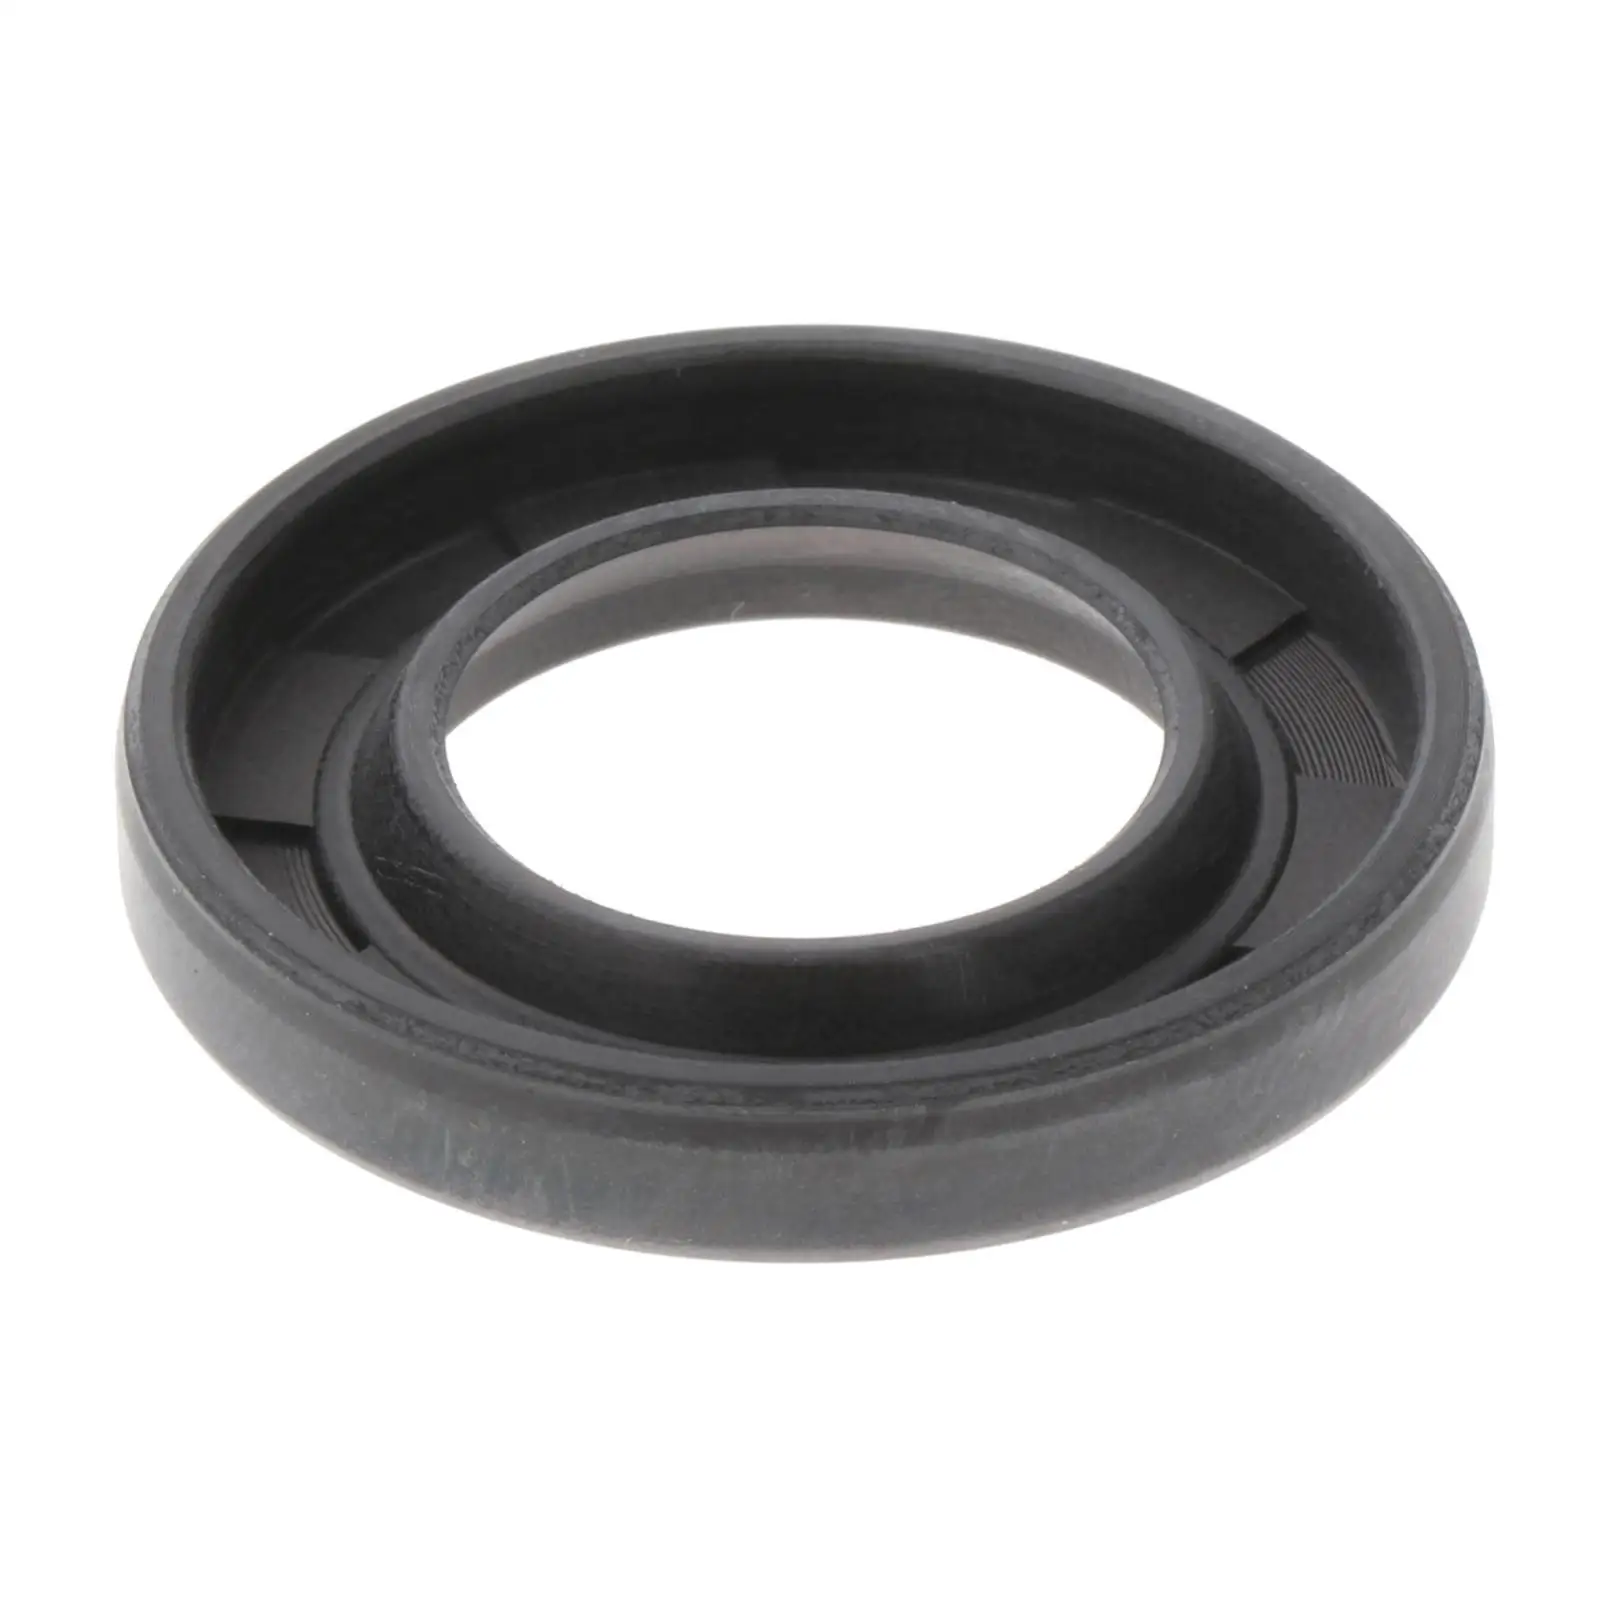 Oil Seal Direct Replaces for Yamaha Outboard Motor 60HP 70HP 2 Stroke